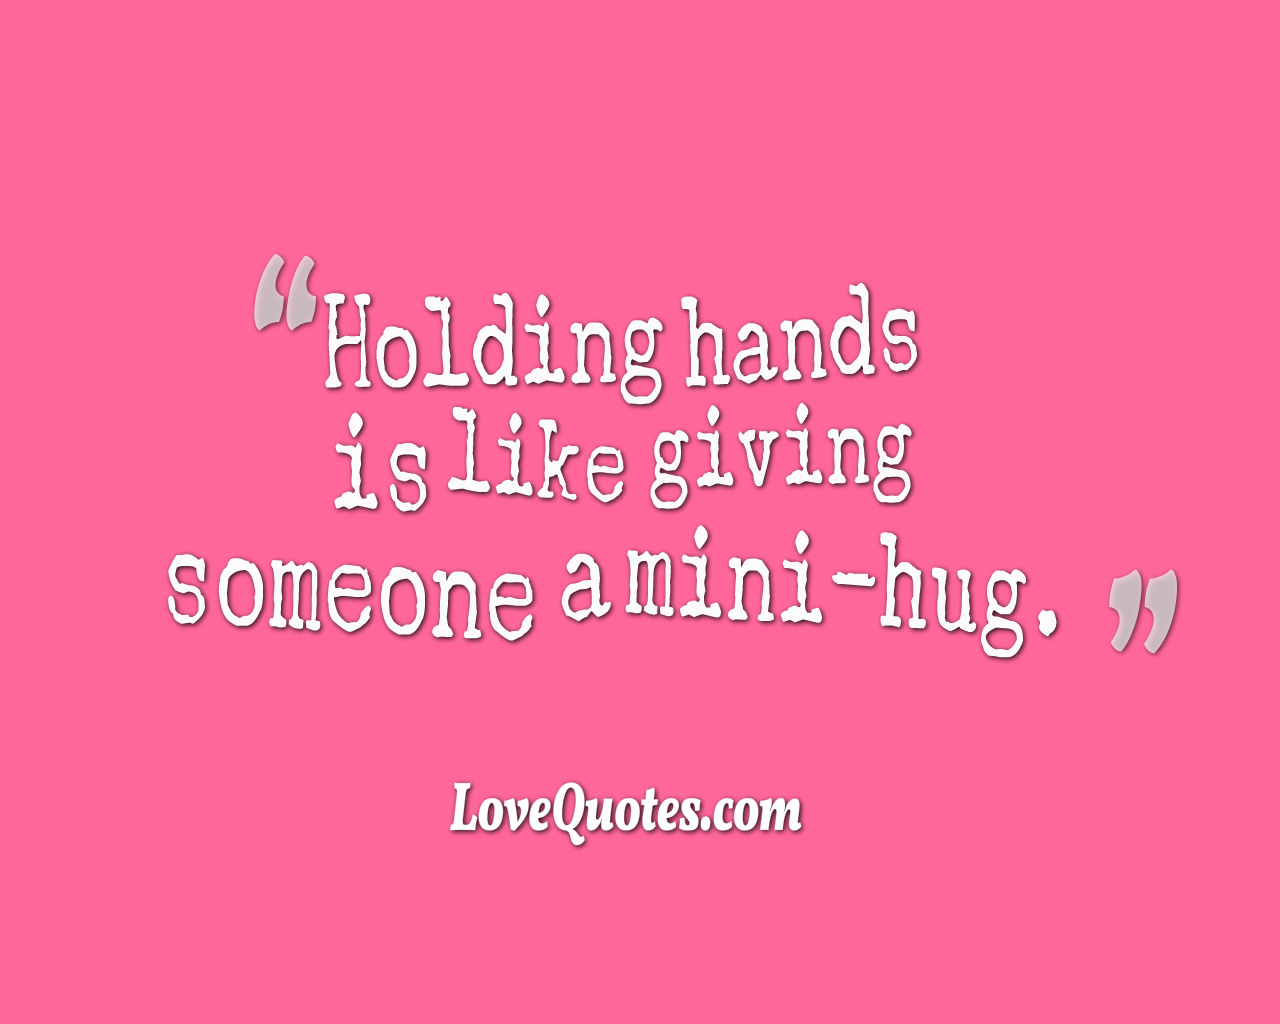 Love quotes on holding hands